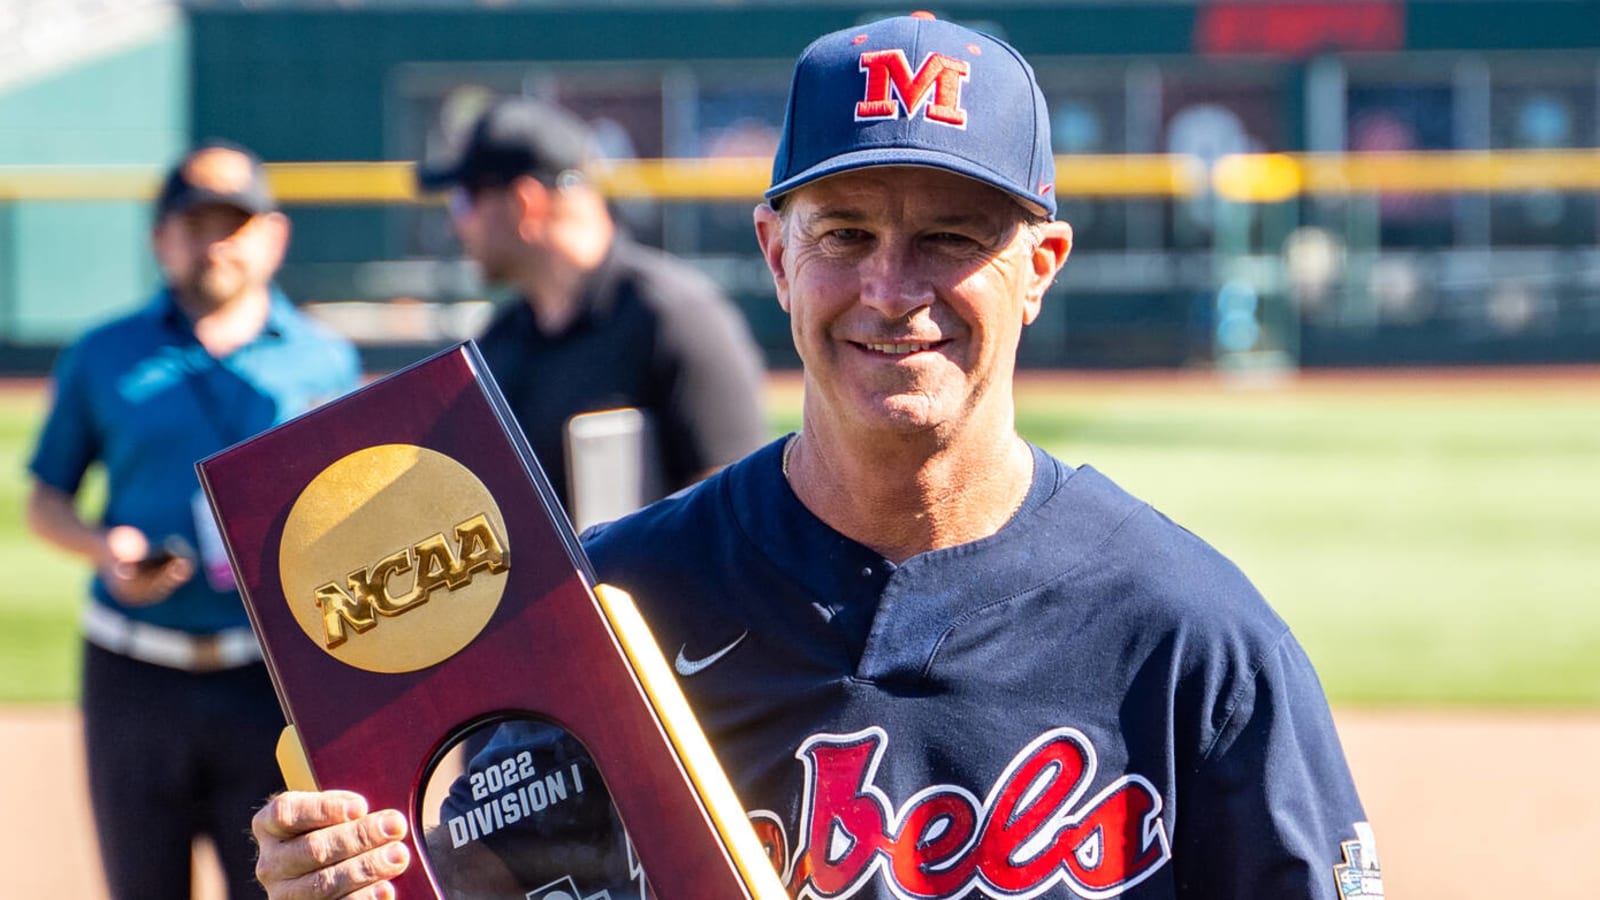 Ole Miss wins College World Series following two wild pitches in eighth inning